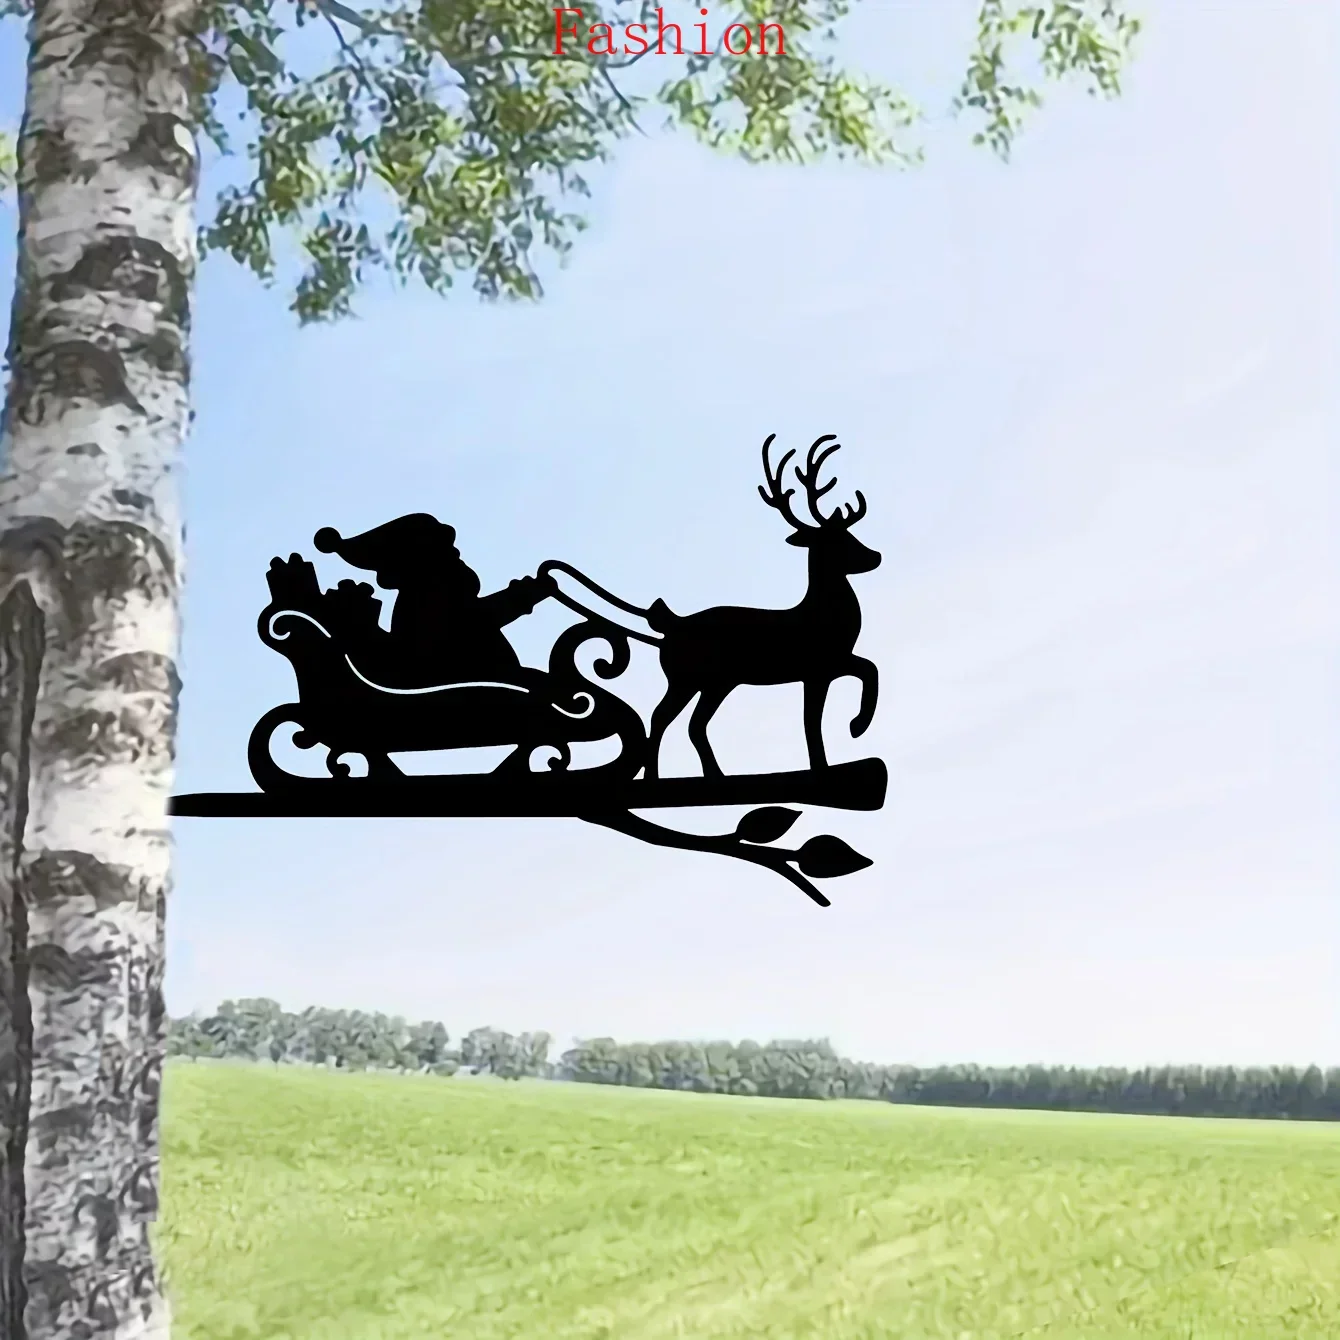 

Reindeer Santa Claus on Branch Steel Silhouette Metal Wall Decor Art Home Garden Yard Patio Outdoor Statue Stake Decoration wal